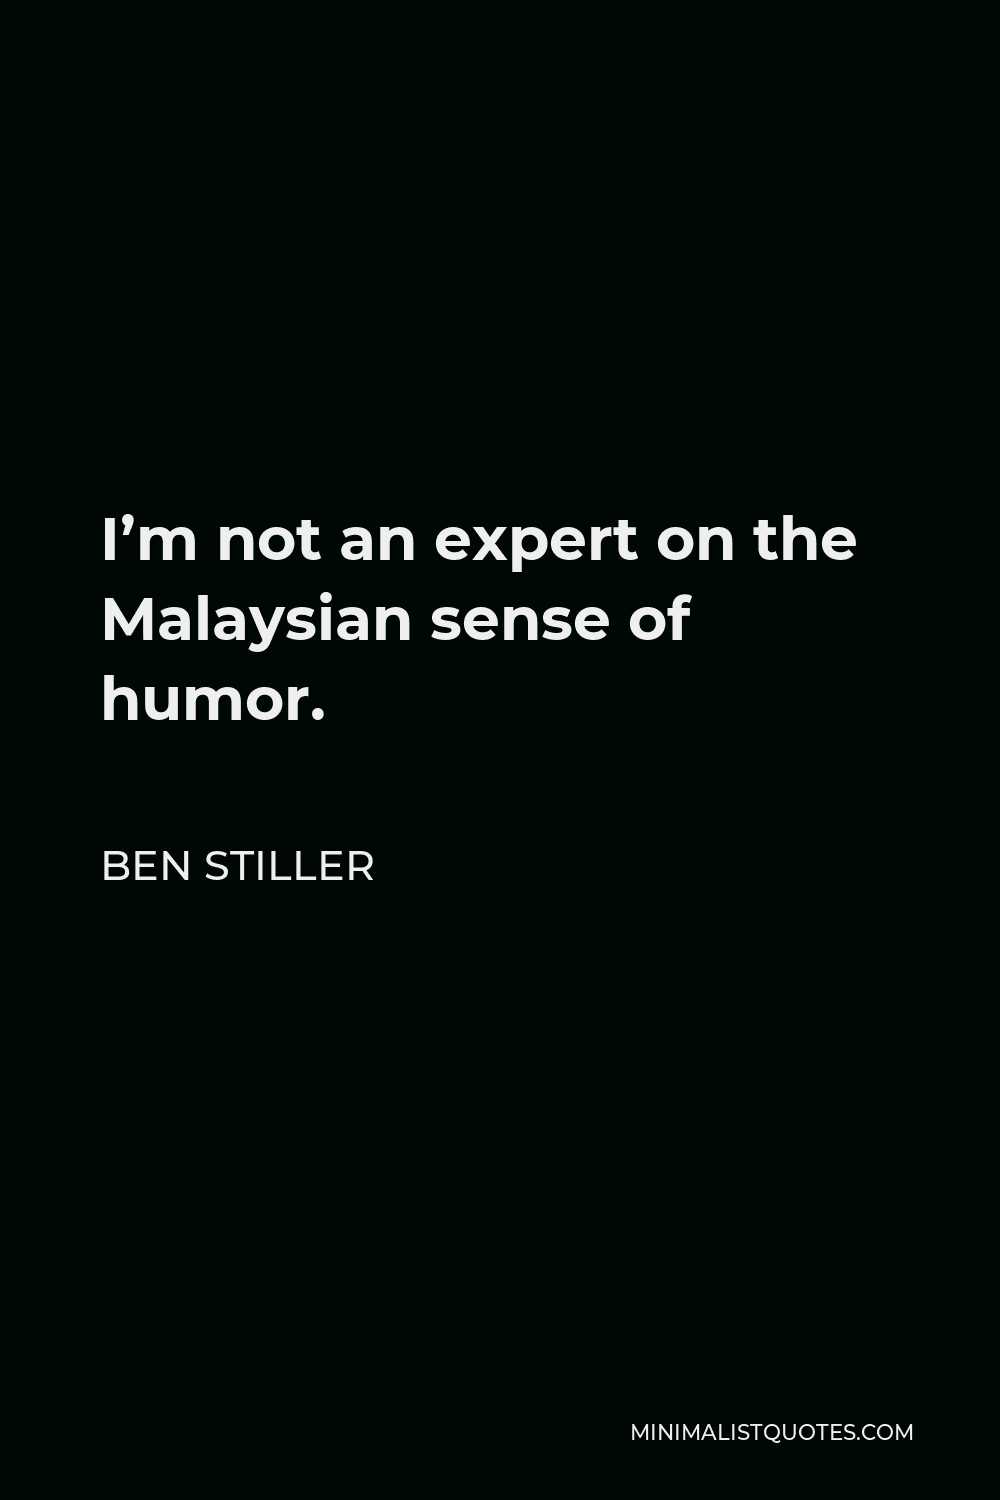 Ben Stiller Quote - I’m not an expert on the Malaysian sense of humor.